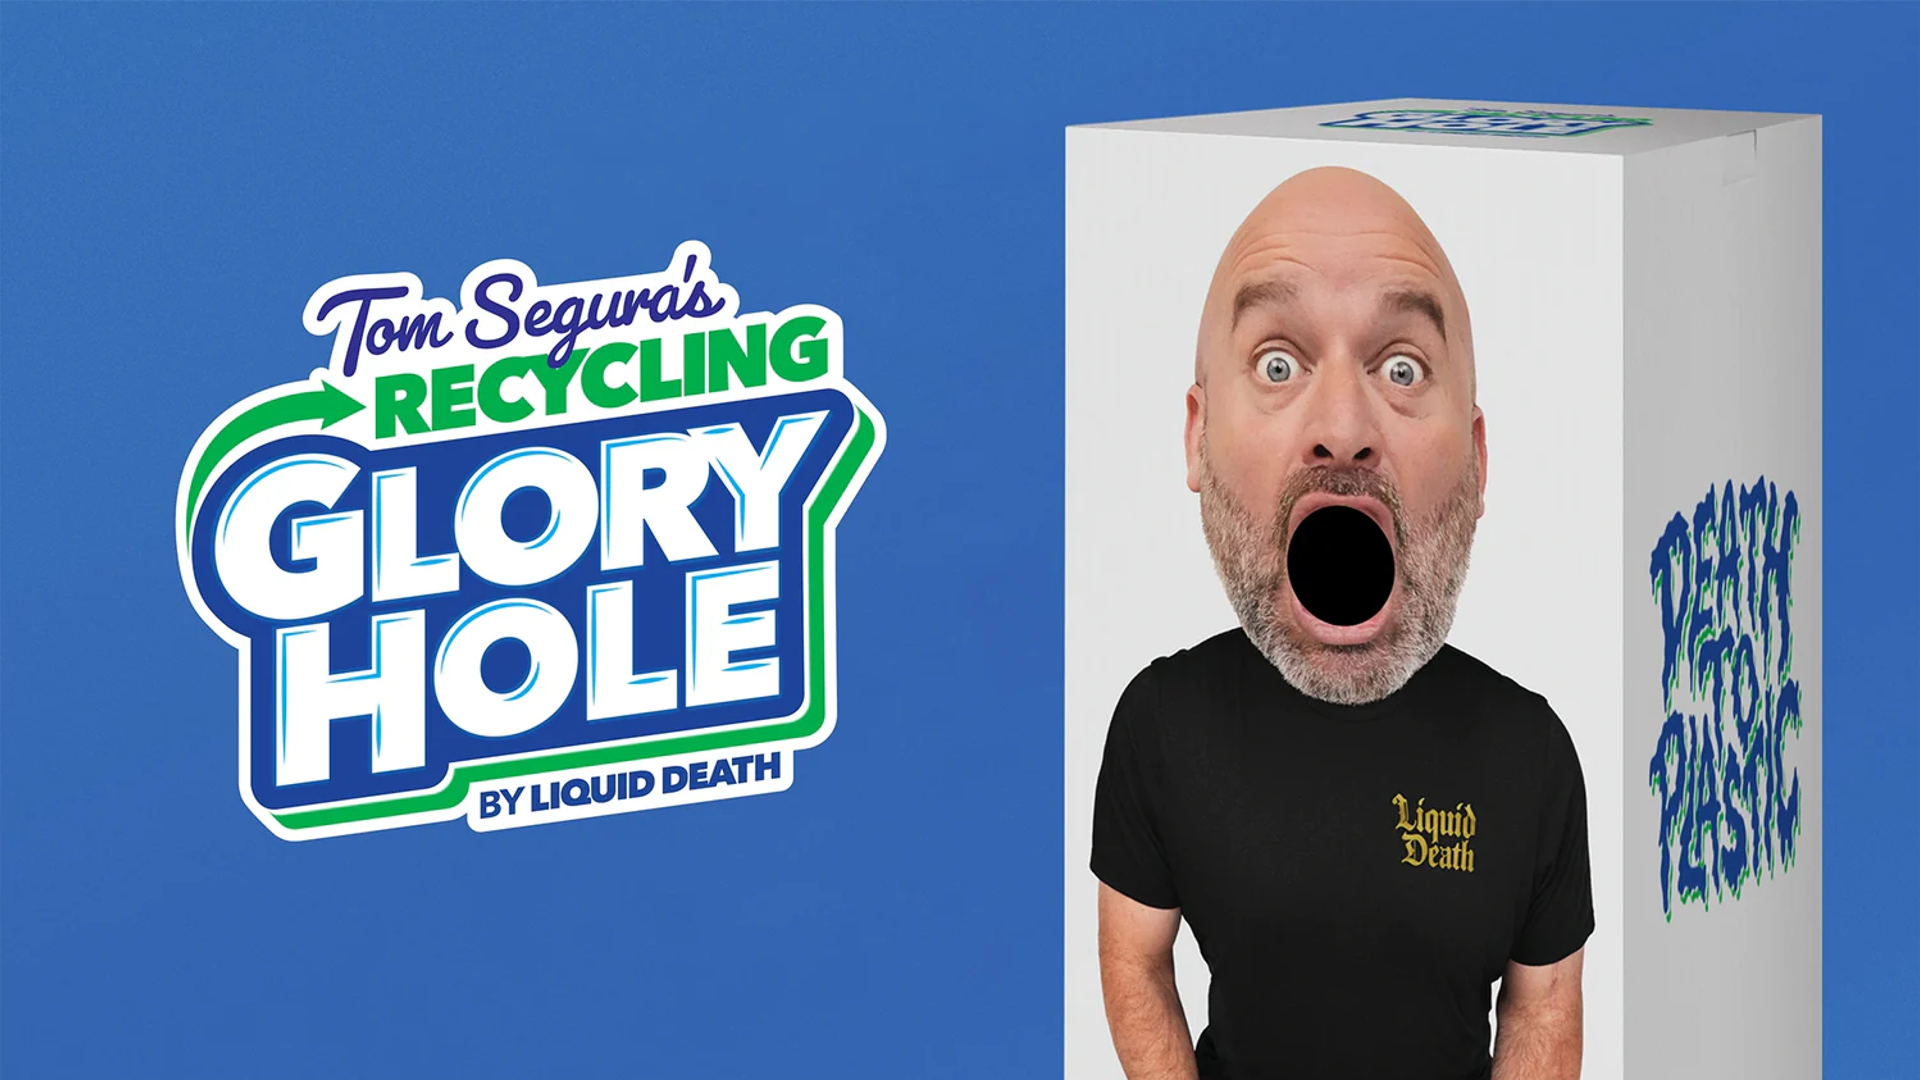 Featured image for Latest Liquid Death Stunt Features Tom Segura Making Recycling 'Glorious'